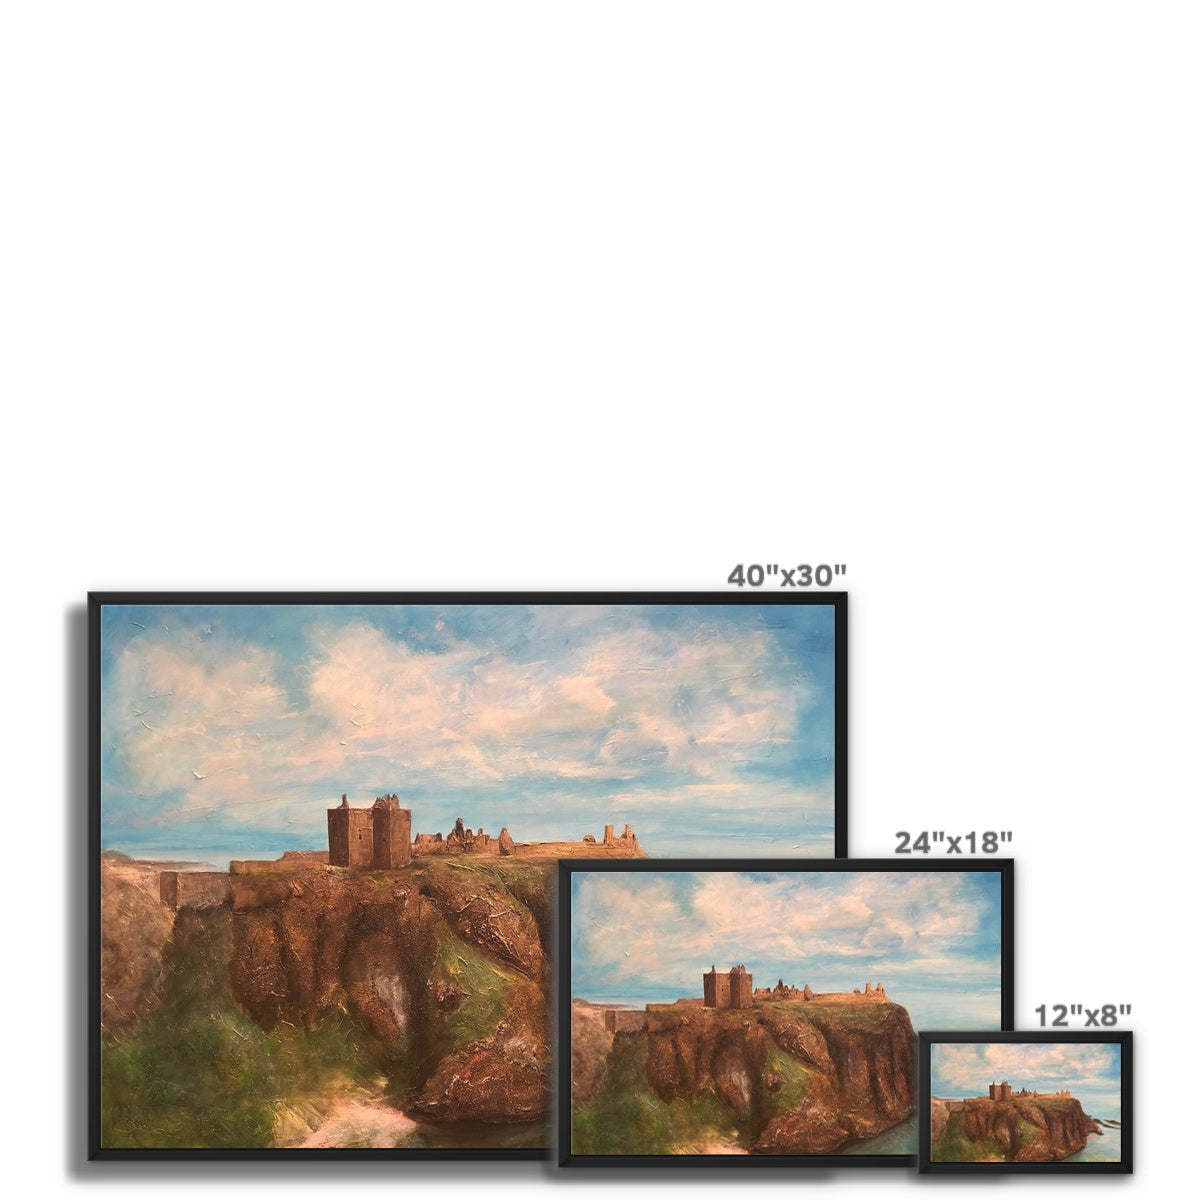 Dunnottar Castle Painting | Framed Canvas From Scotland-Floating Framed Canvas Prints-Historic & Iconic Scotland Art Gallery-Paintings, Prints, Homeware, Art Gifts From Scotland By Scottish Artist Kevin Hunter